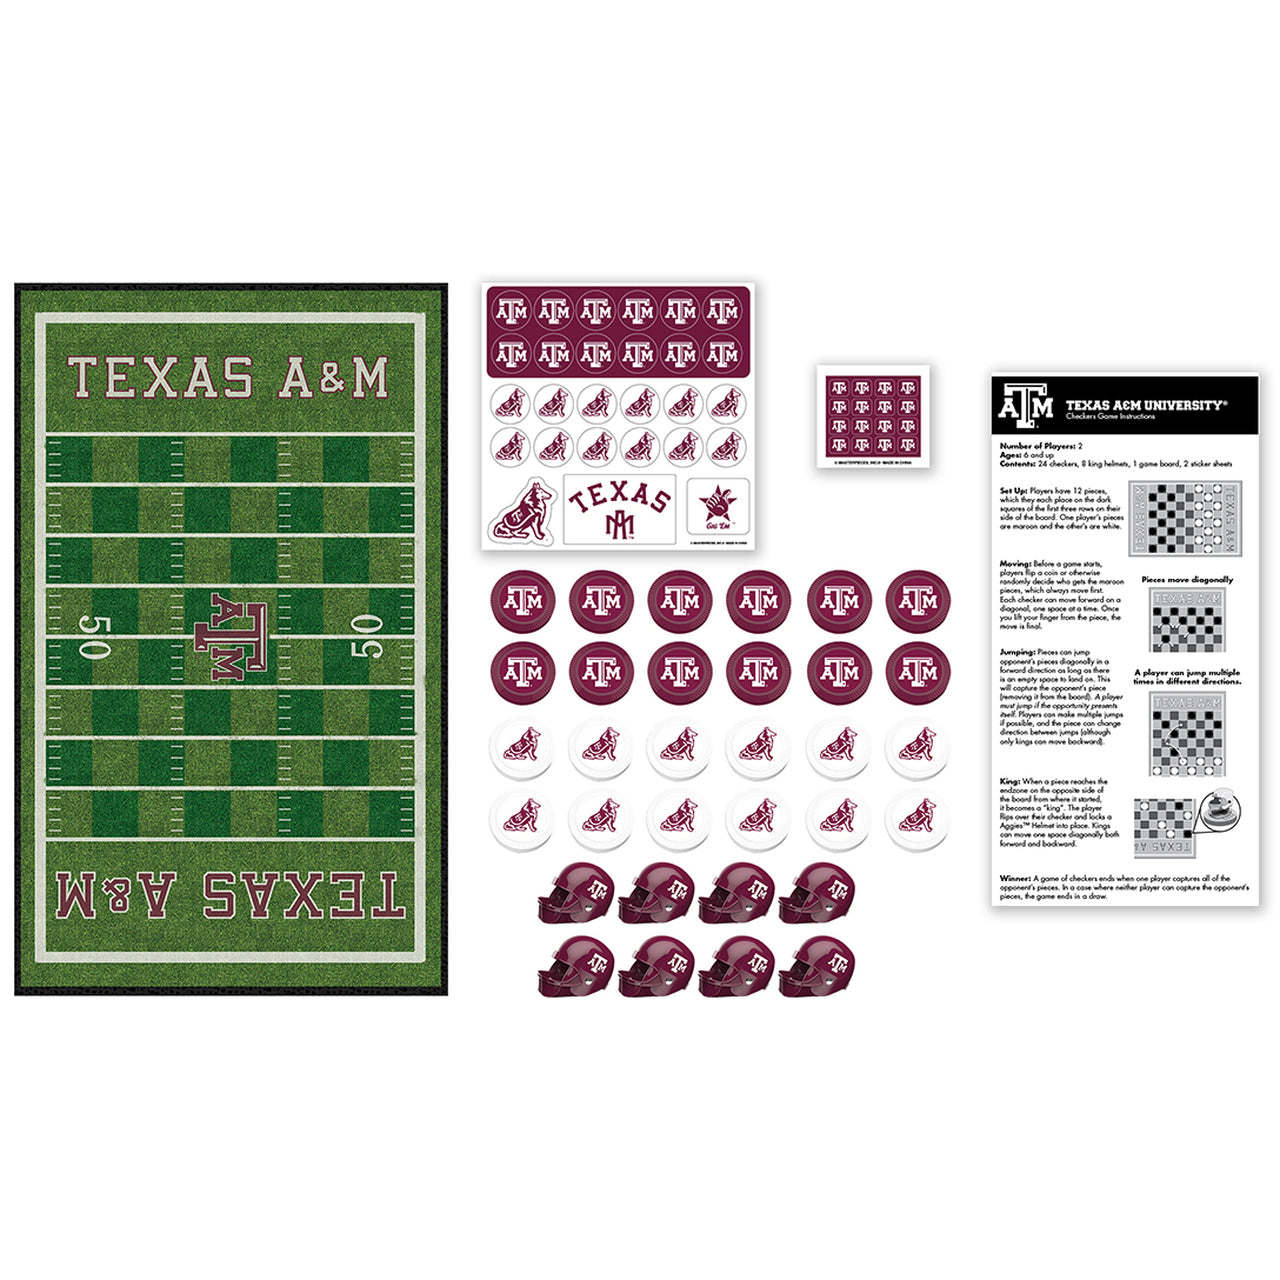 Texas A&M Checkers Board Game by Masterpieces